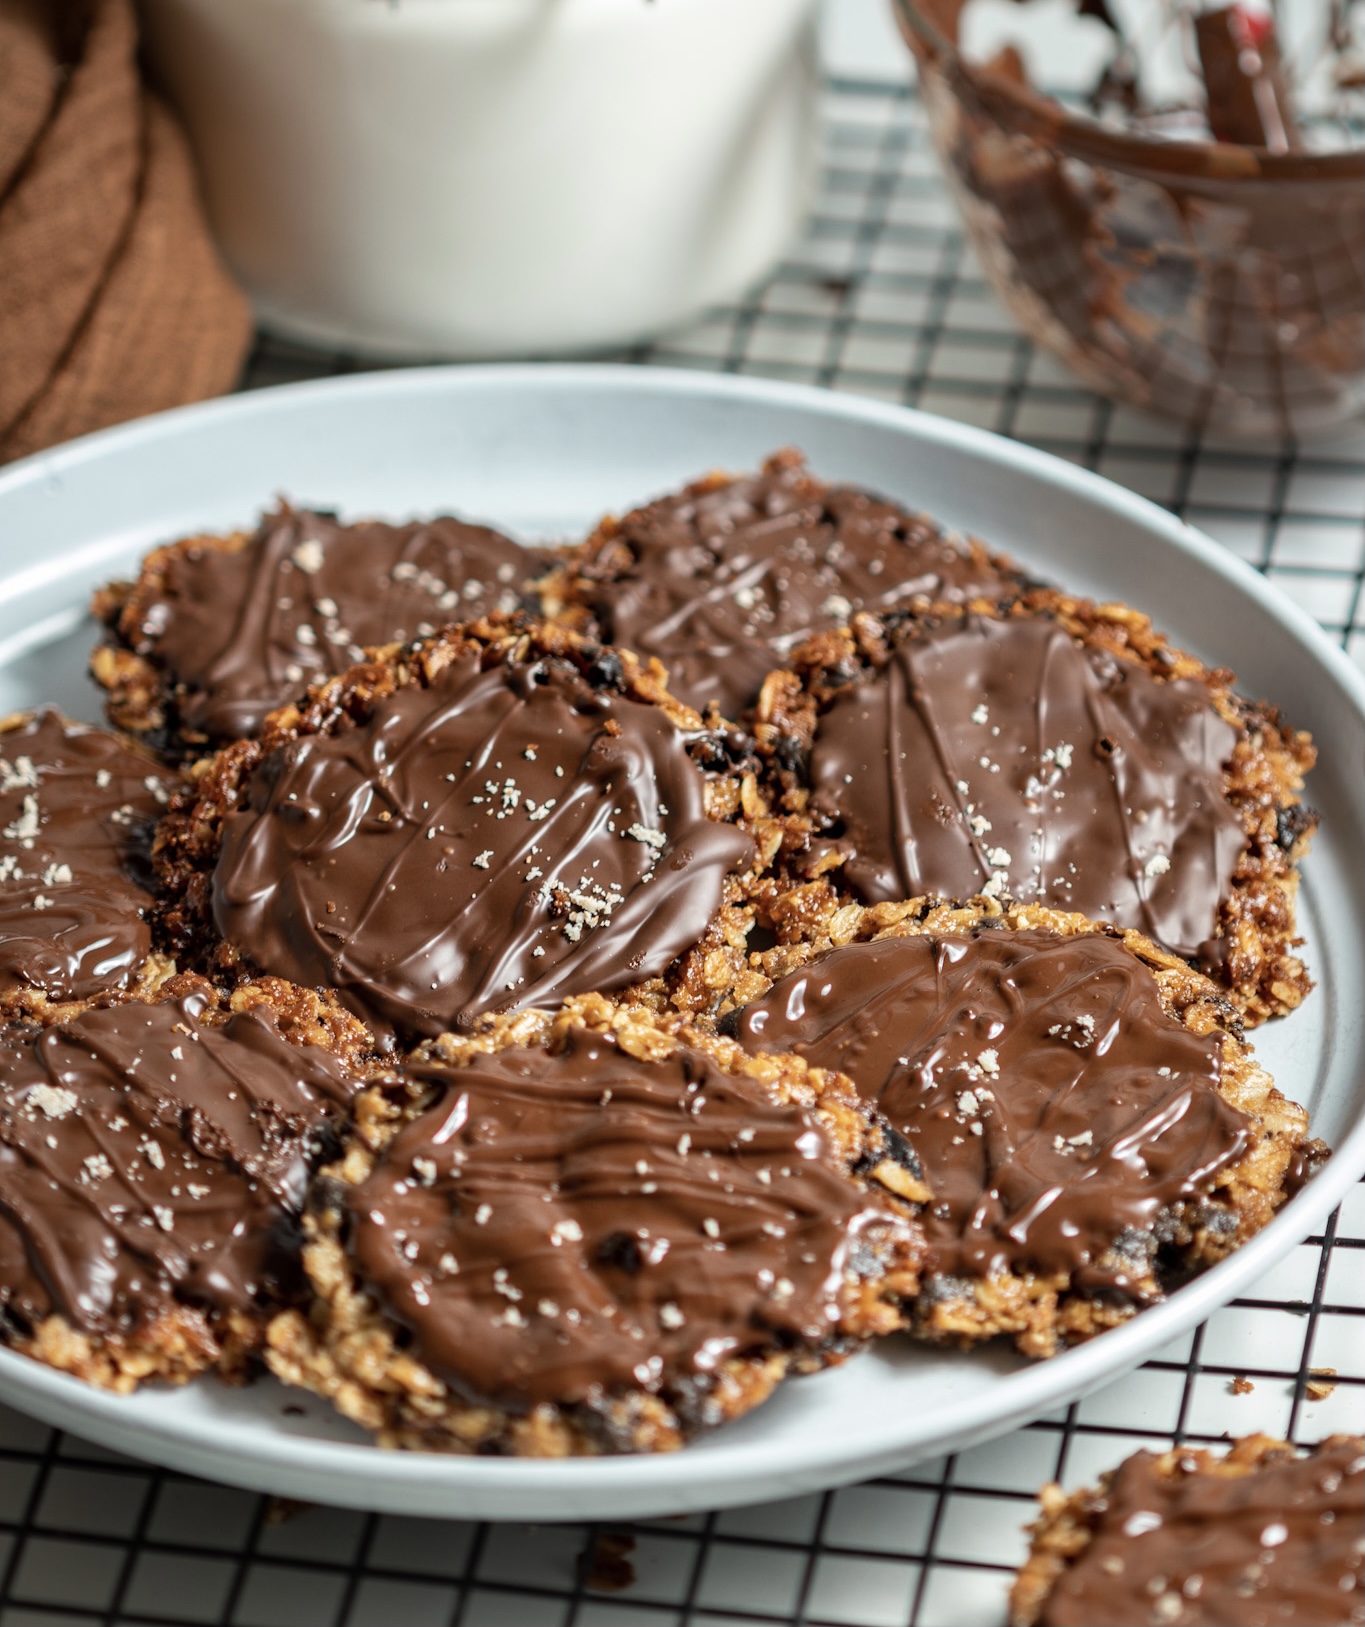 Oats and Chocolate Hobnobs